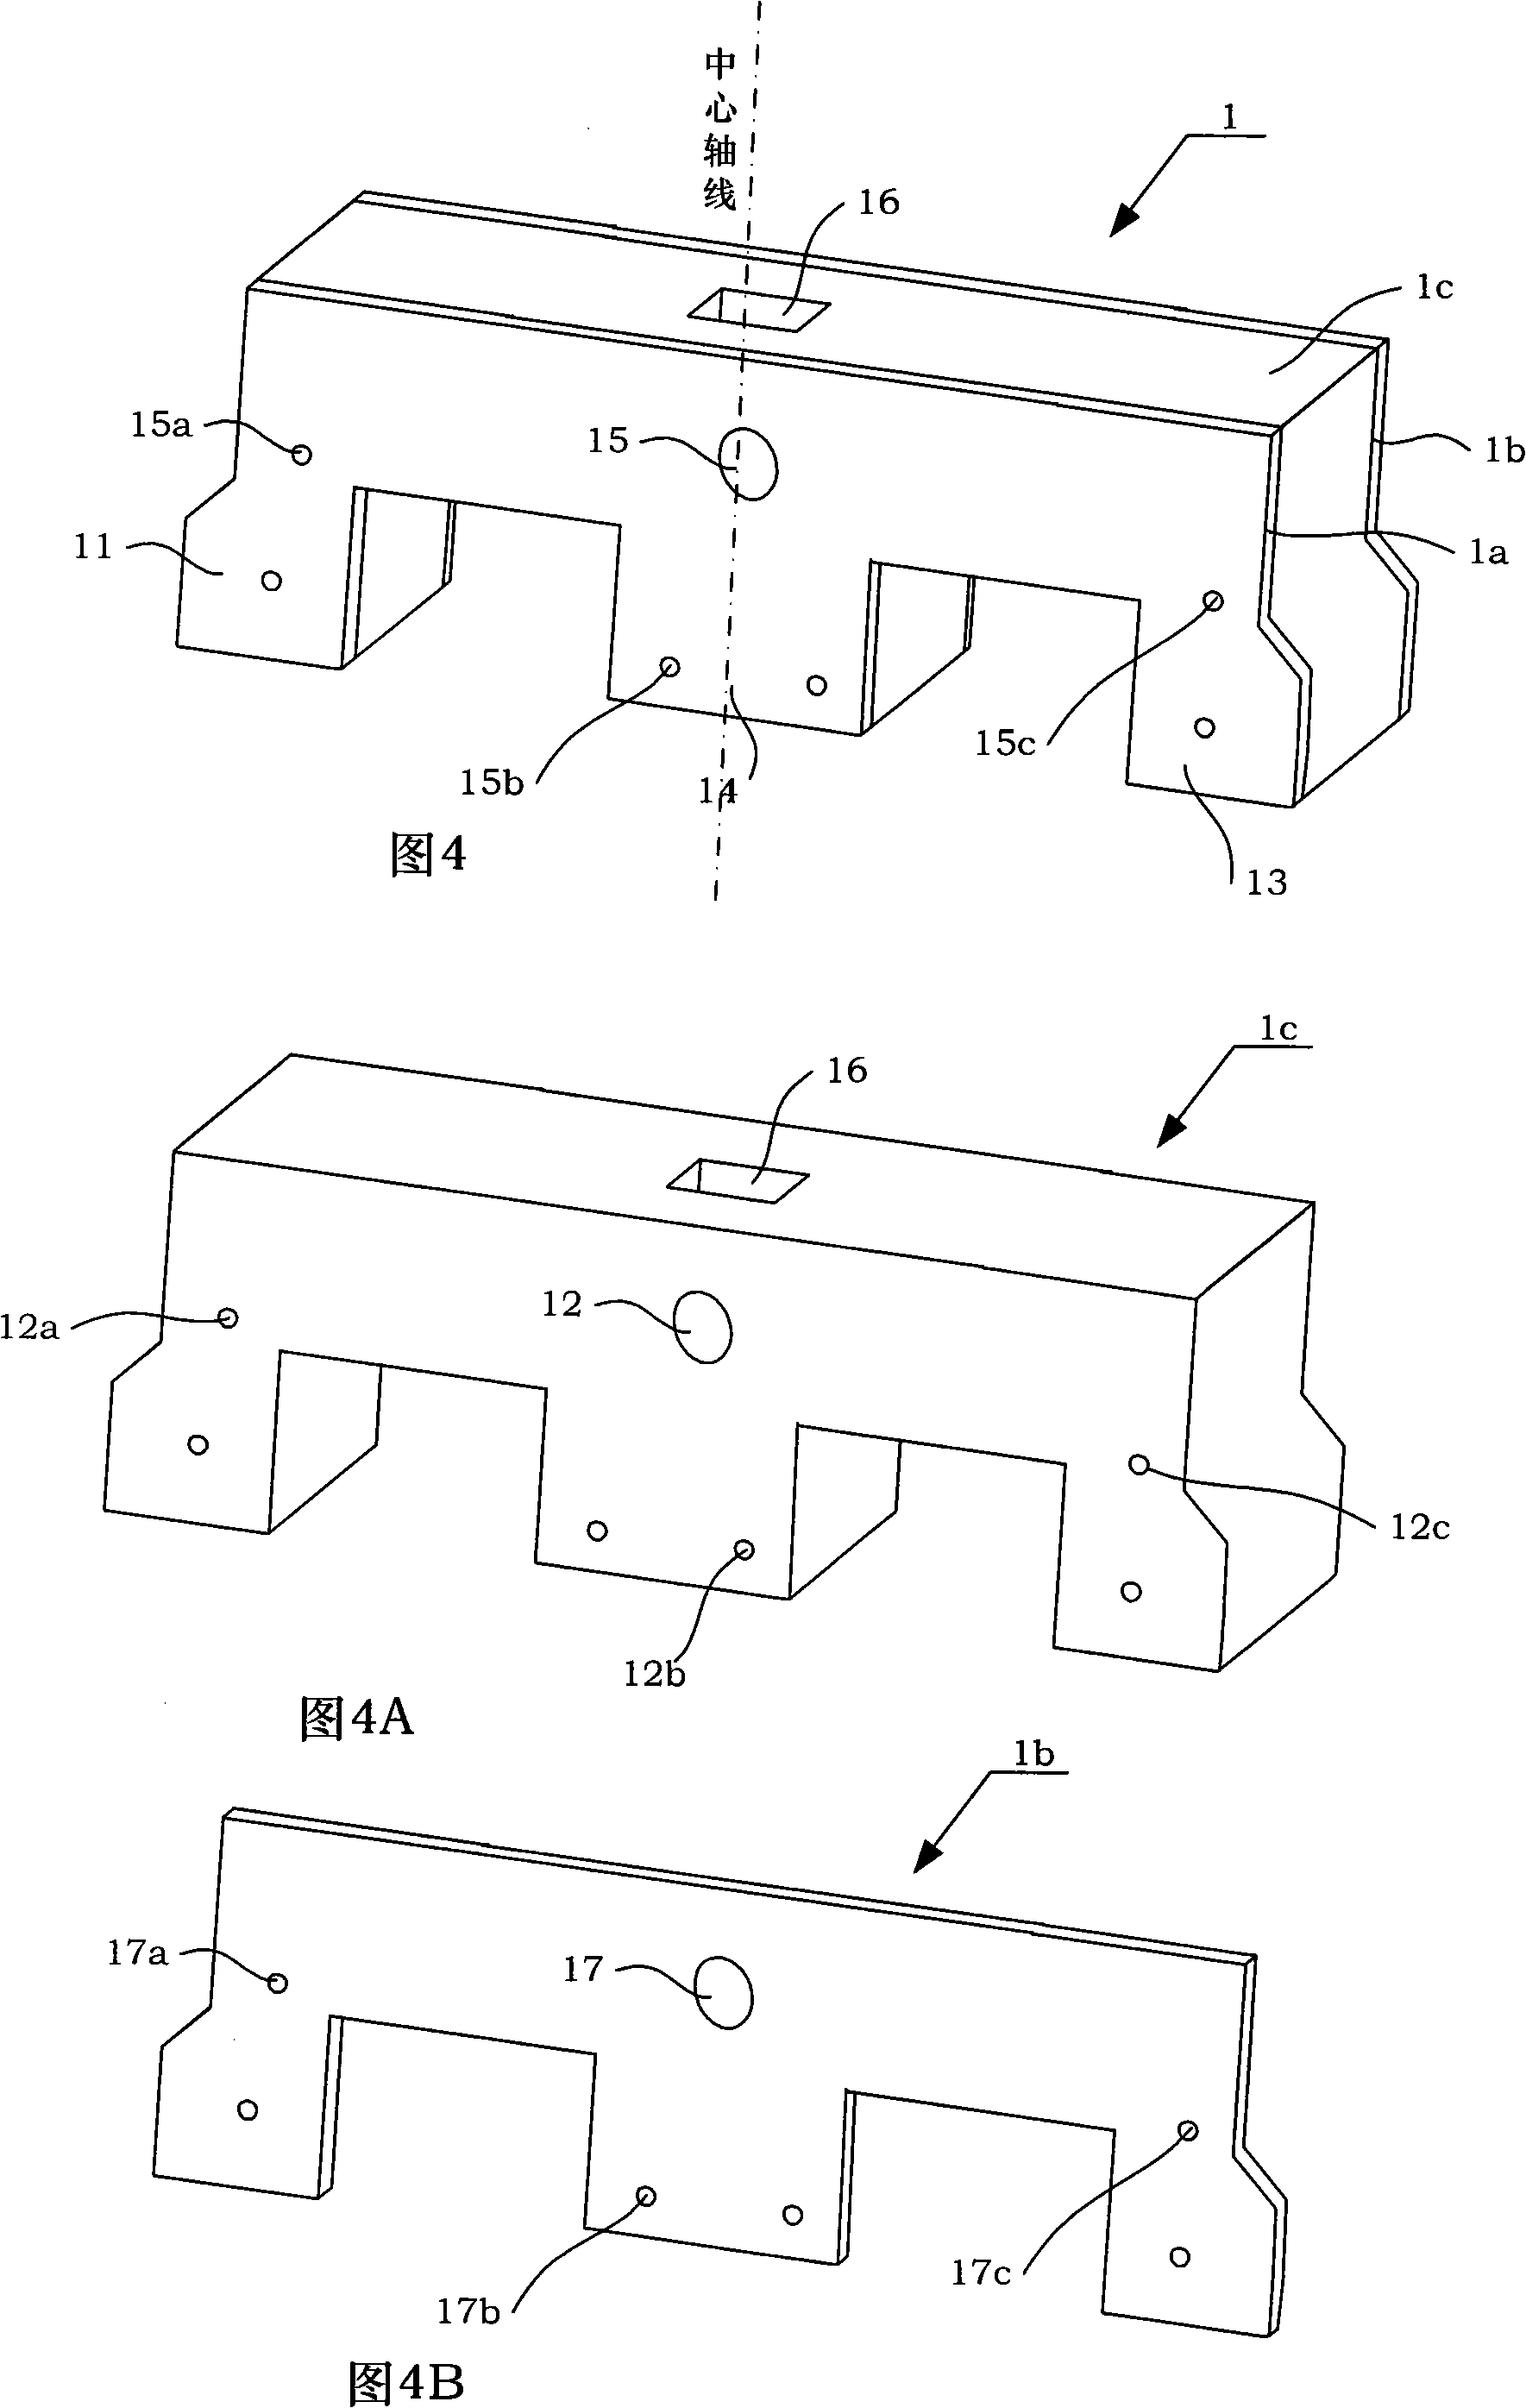 Monostable permanent magnet control mechanism with multiple force output air gaps